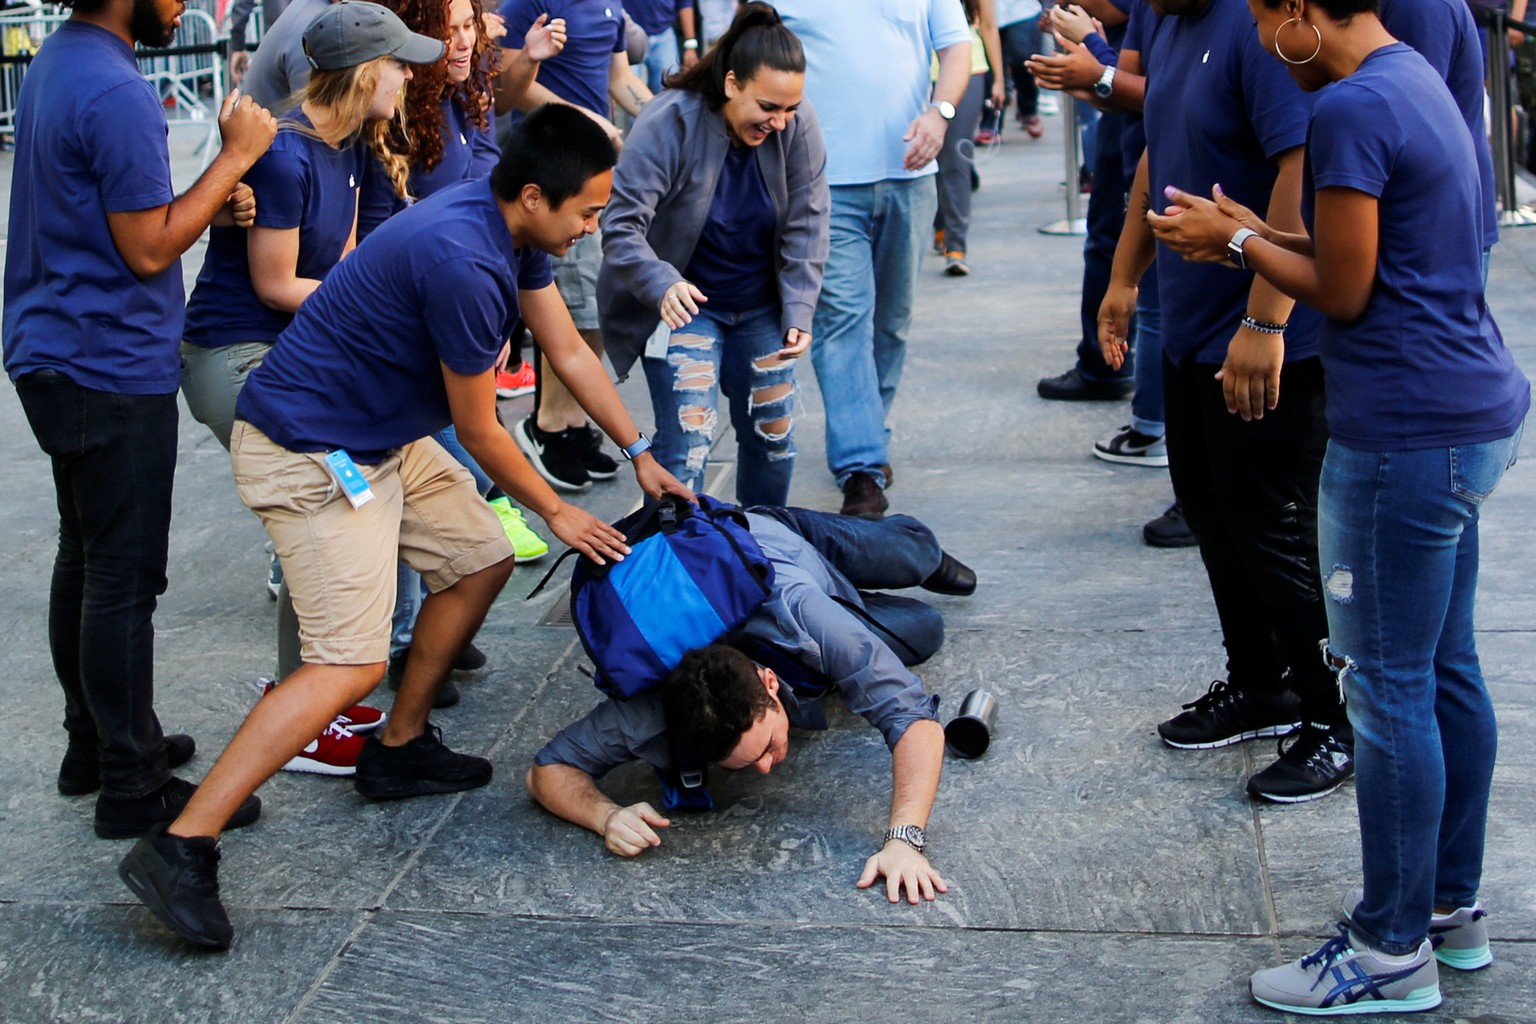 Apple workers assist a customer who fell down before going into the Apple Inc. during the sale of the iPhone 7 smartphone in New York, U.S., September 16, 2016. REUTERS/Eduardo Munoz TPX IMAGES OF THE ...